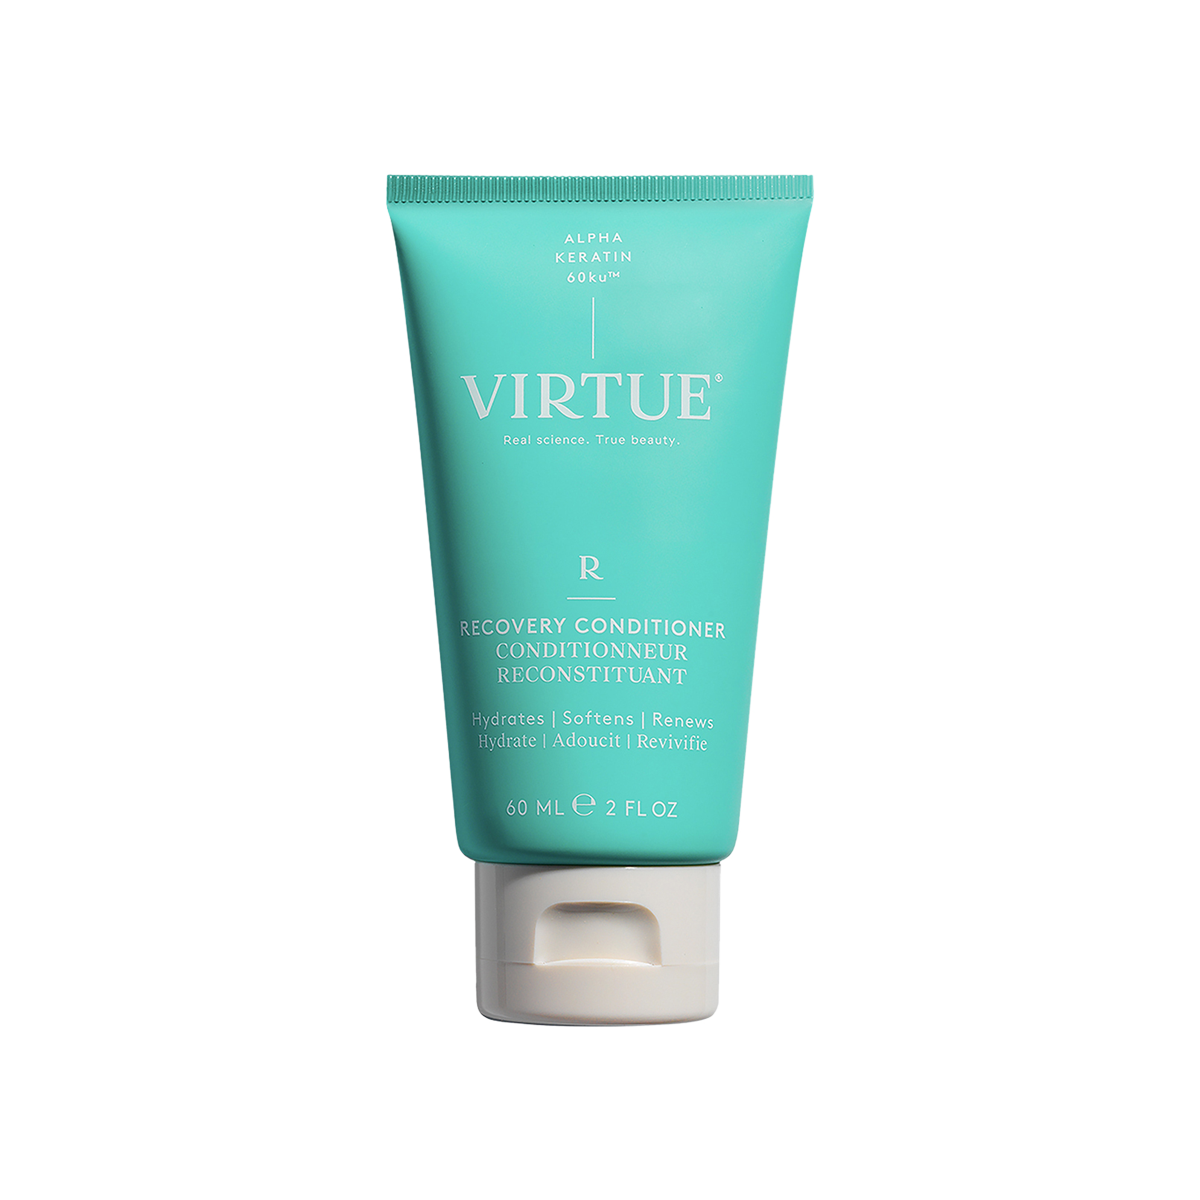 Virtue - Recovery Conditioner Travel Size